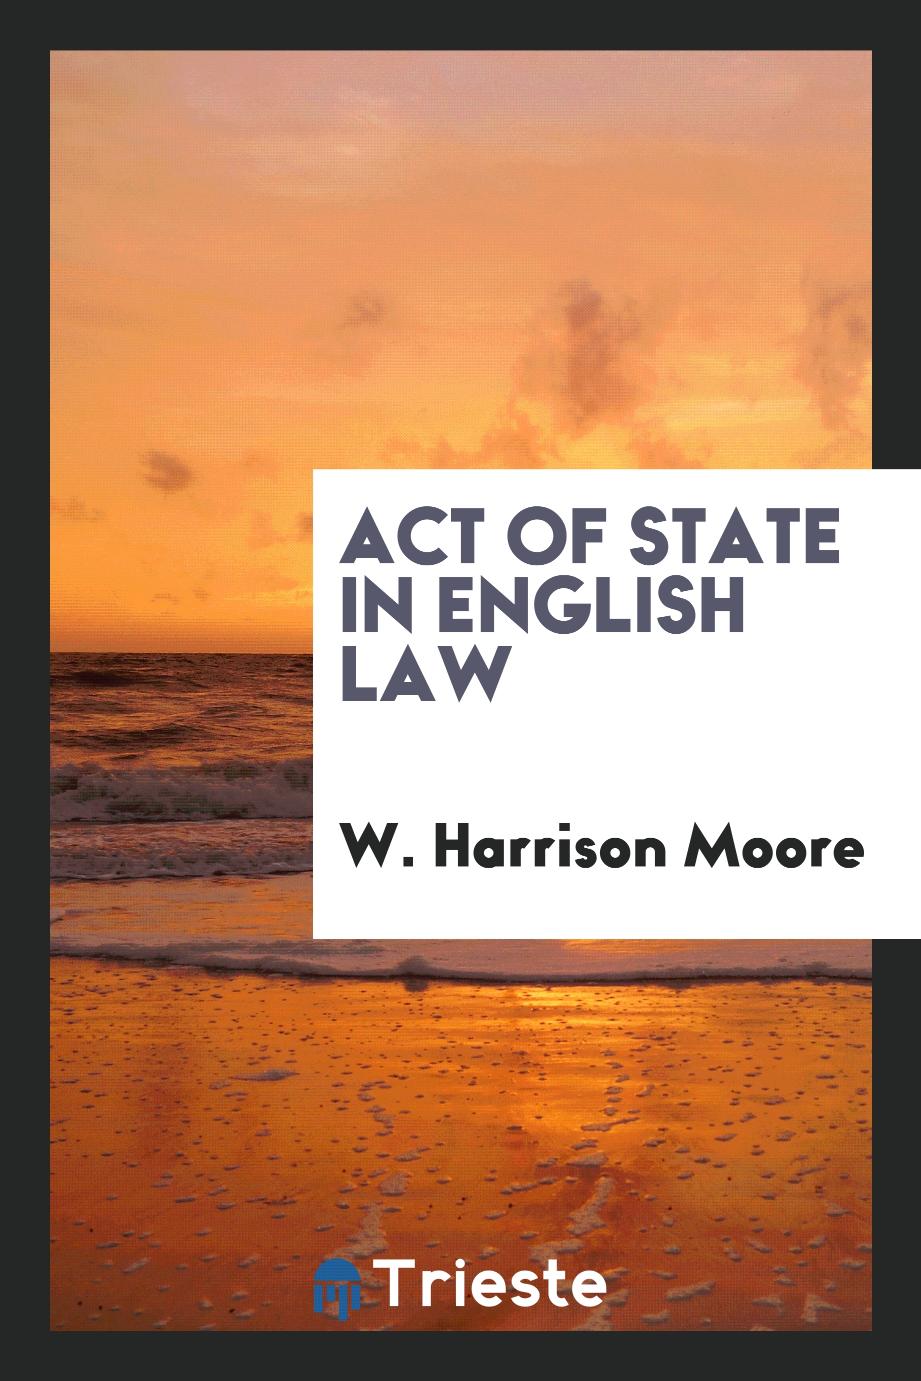 Act of state in English law